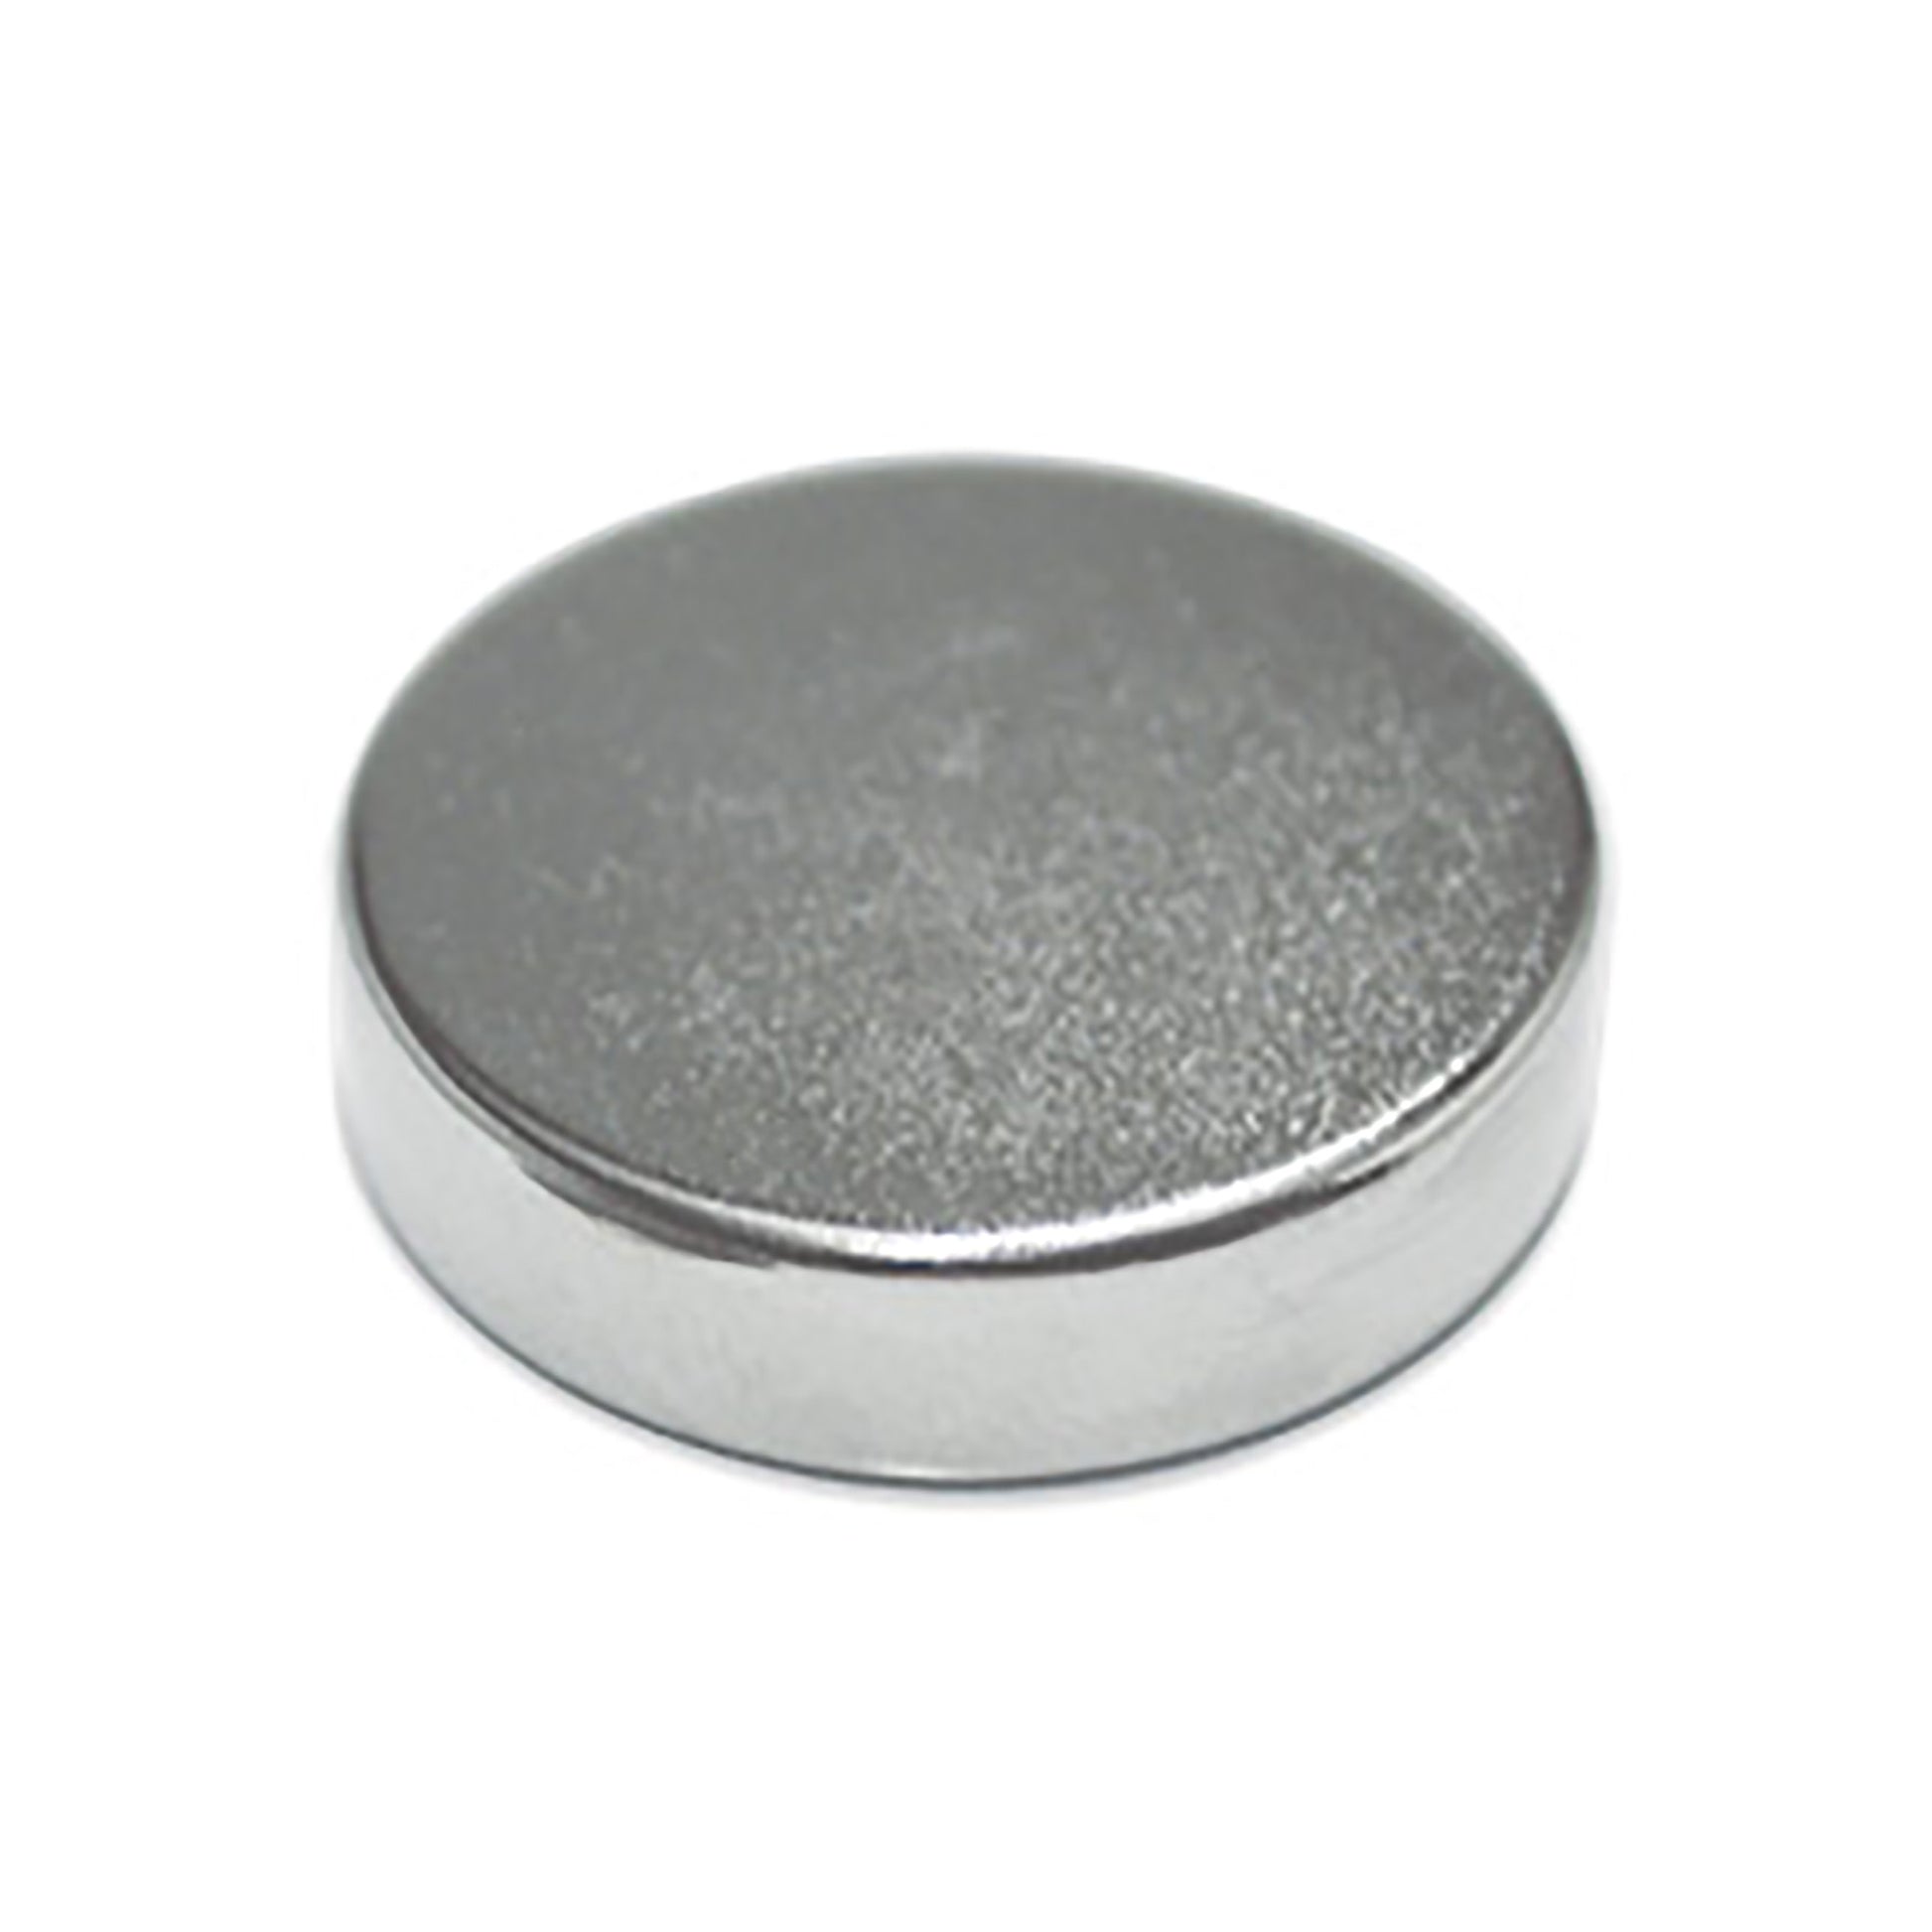 Load image into Gallery viewer, 07047 Neodymium Disc Magnets (3pk) - 45 Degree Angle View